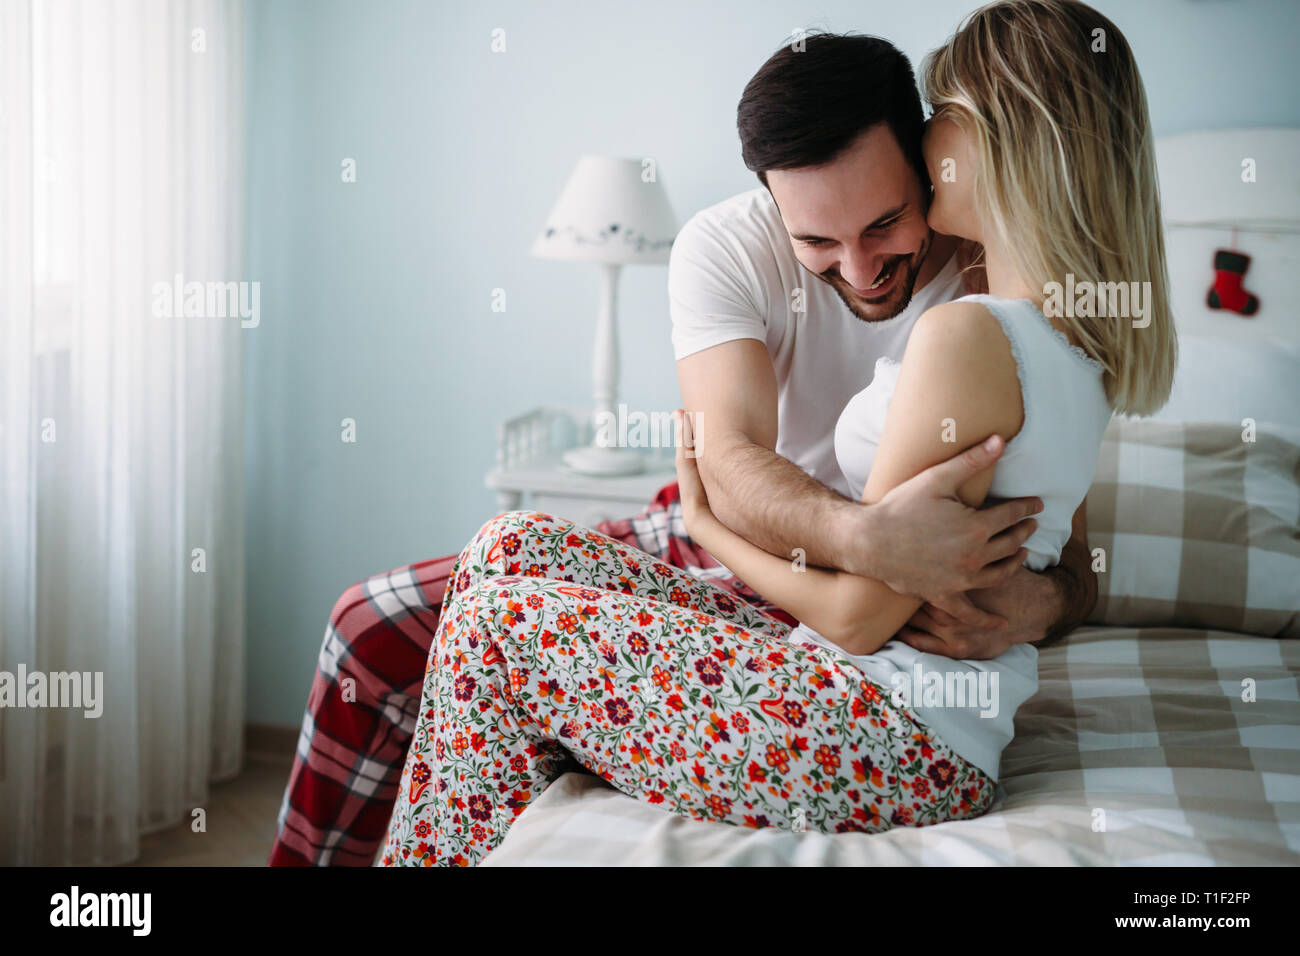 Portrait of young loving couple in bedroom Stock Photo